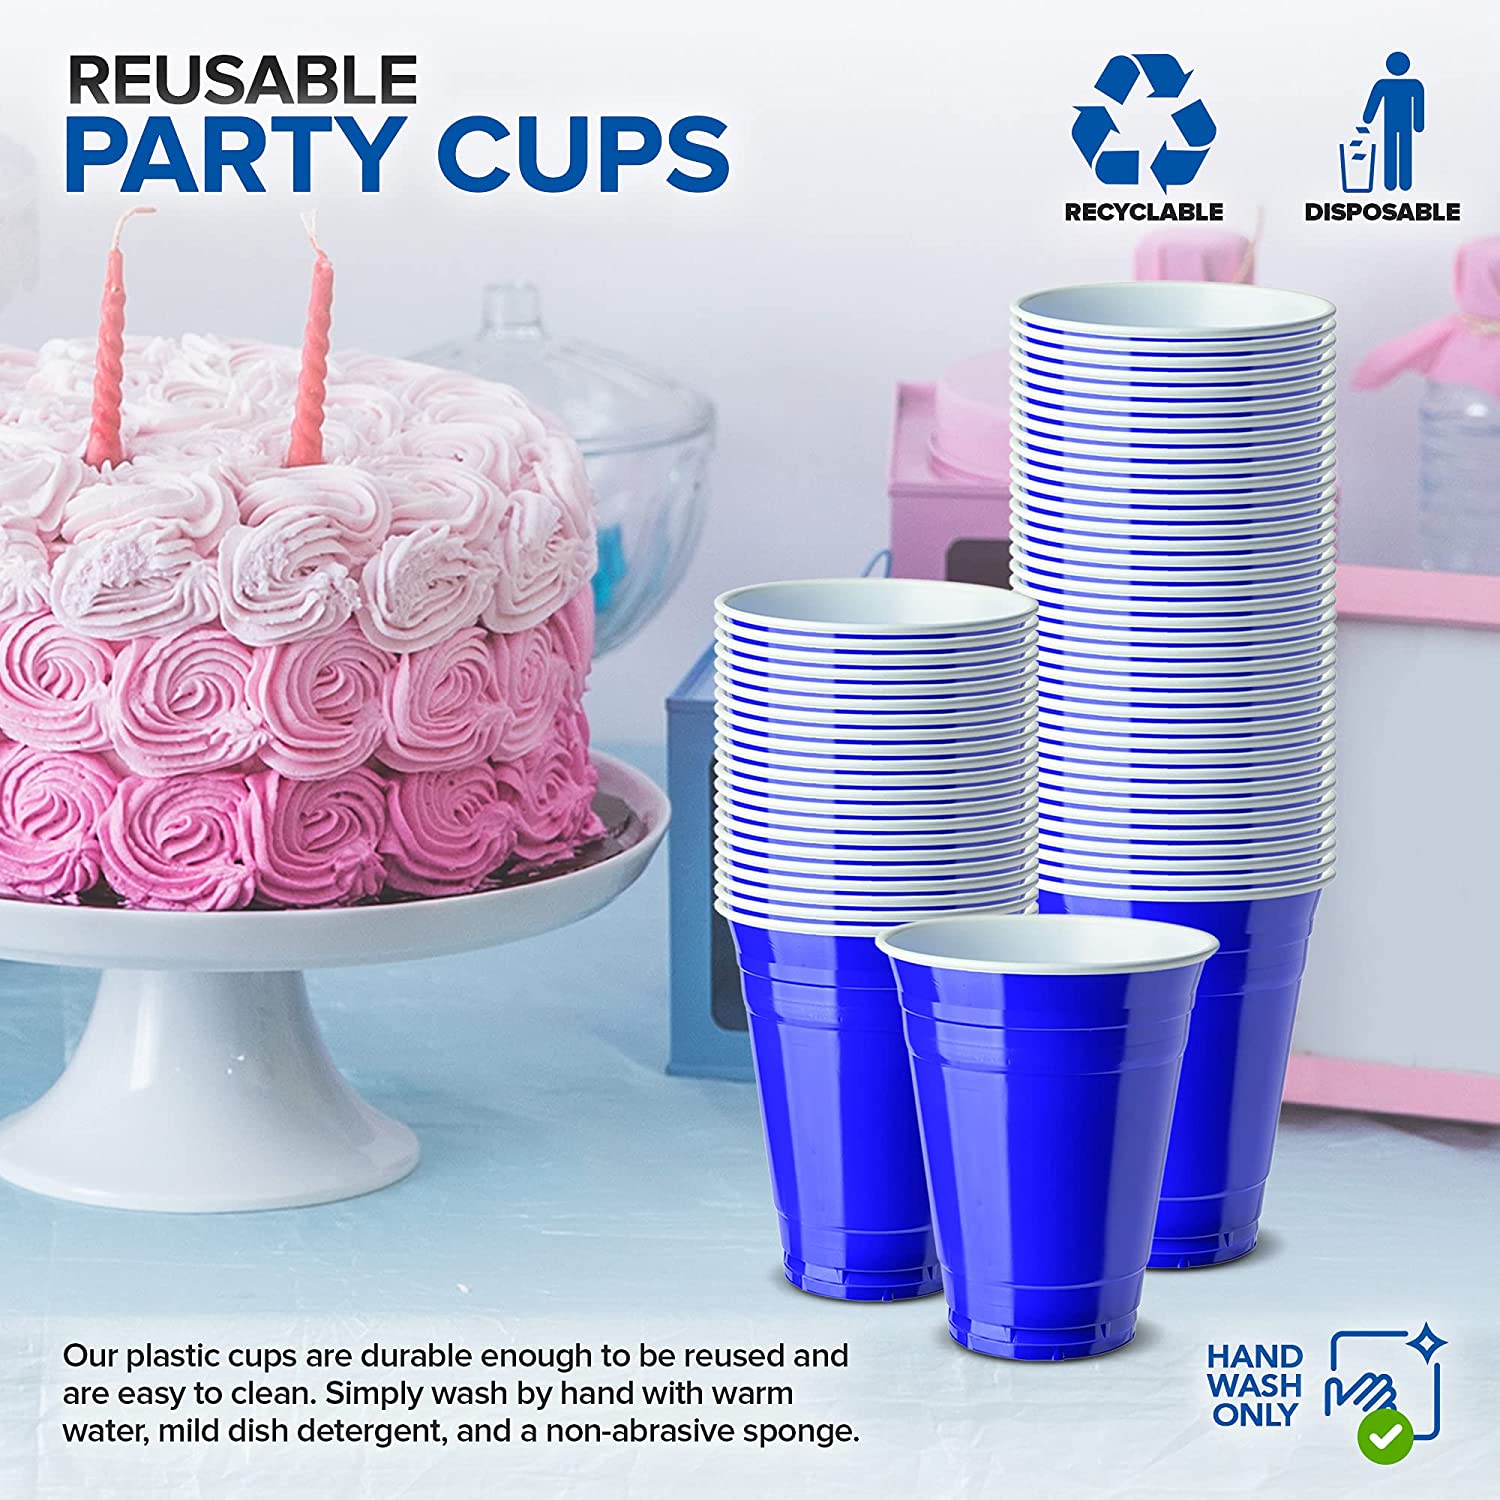 THE COOL STEEL BEVERAGE CUP 16 oz Reusable Recyclable Cup - Innovation Line